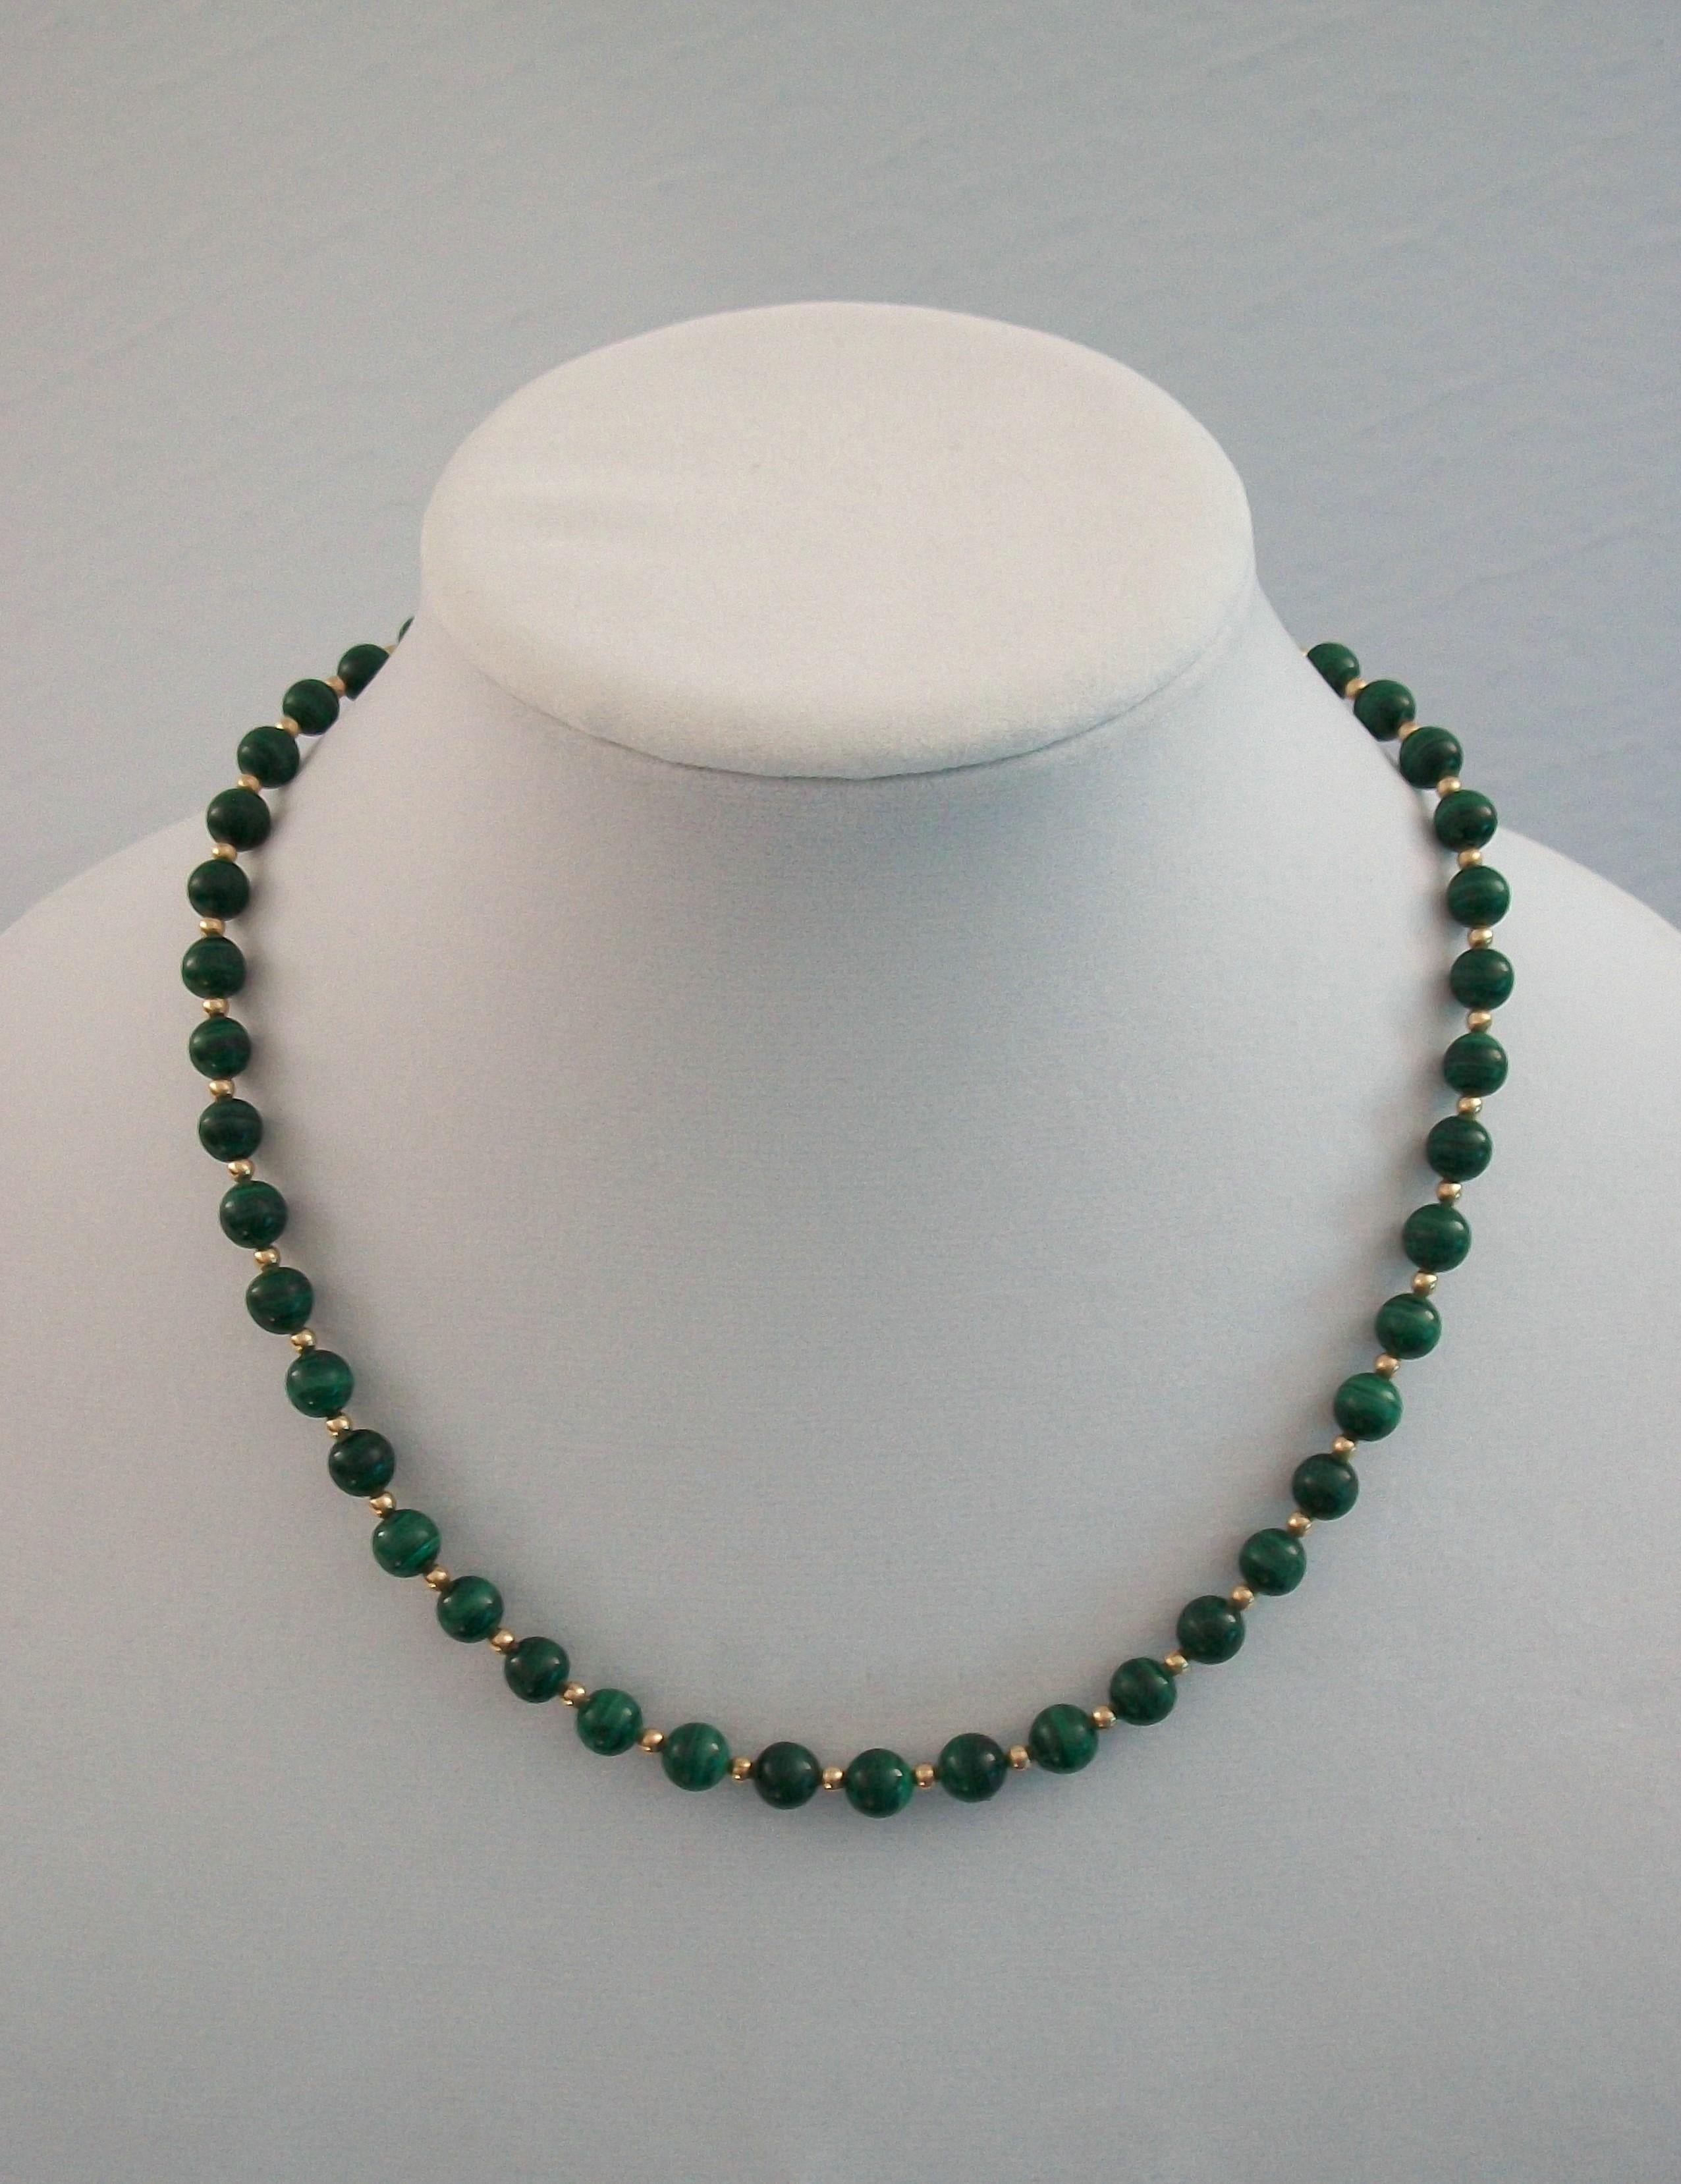 
Fine vintage malachite and 14K yellow gold beaded necklace - featuring 47 round polished malachite beads (8 mm. diameter) and 46 gold spacer beads (3 mm. diameter) - original 14K gold clasp with safety catch - no maker's mark - stamped 585 on the